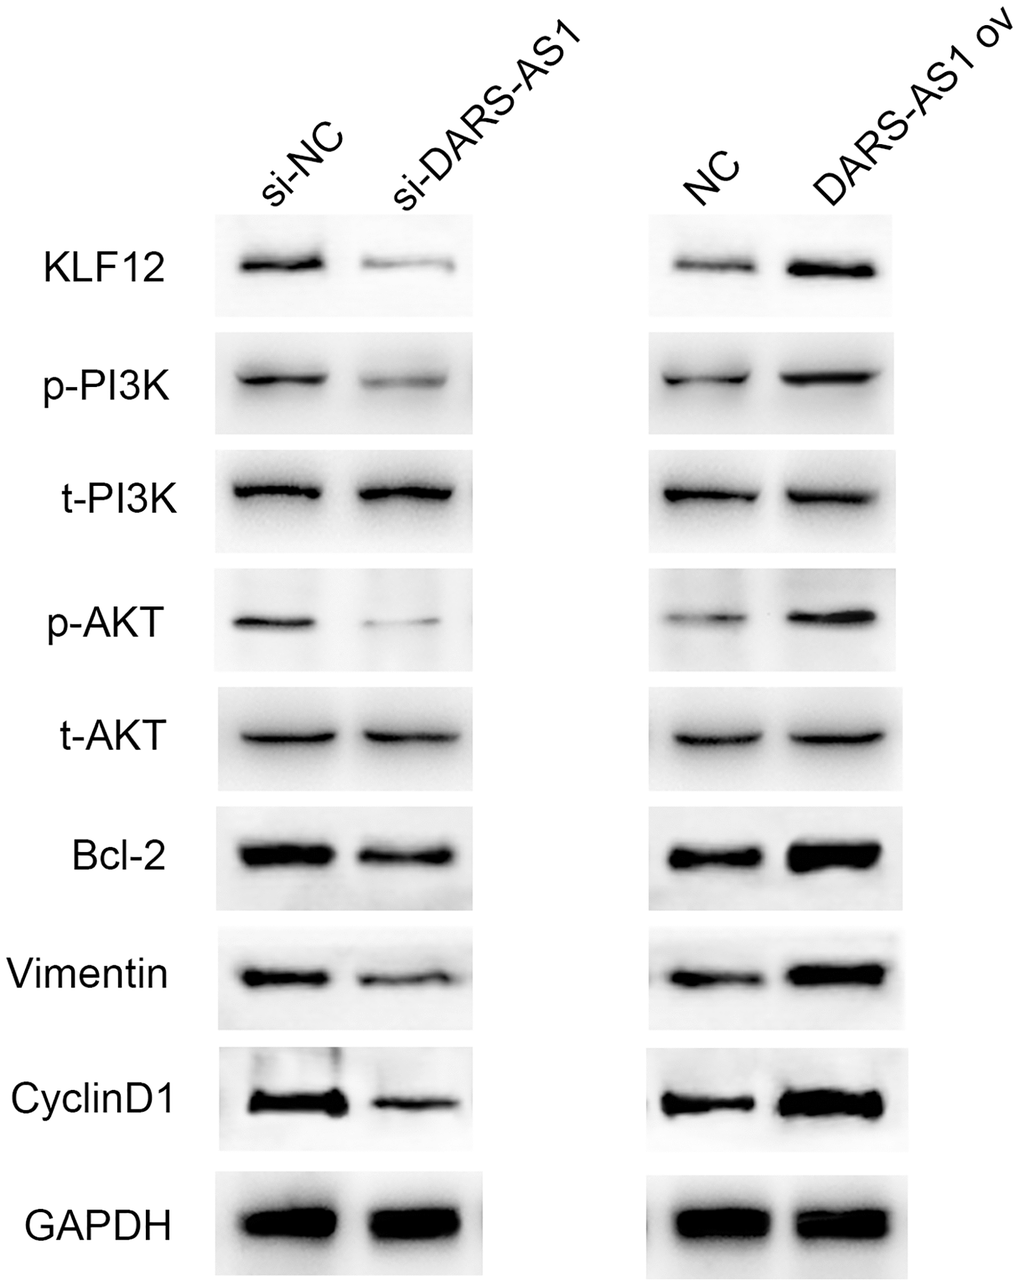 Western blot results demonstrated up-regulation of KLF12, p-PI3K, p-AKT, Bcl-2, Vimentin, and CyclinD1 in the DARS-AS1 overexpression group, while the proteins were down-regulated in the si-DARS-AS1 group.